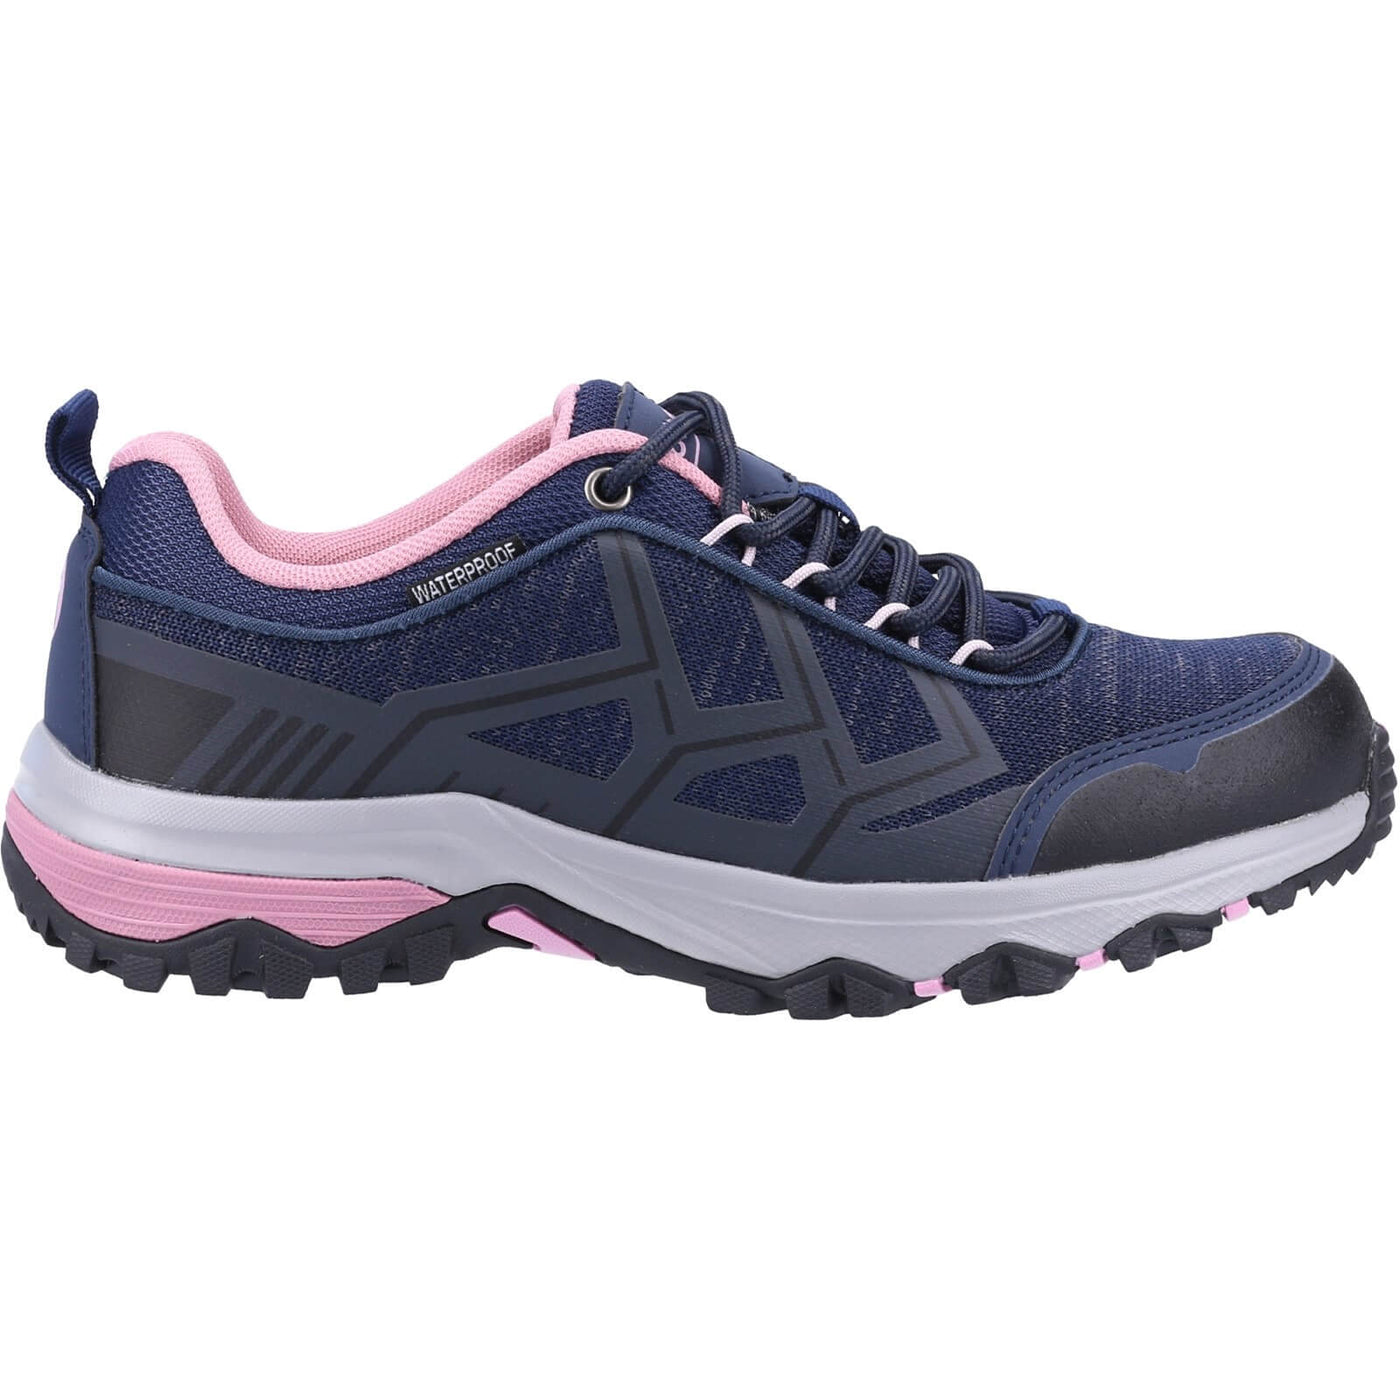 Cotswold Wychwood Low Waterproof Walking Shoes Navy/Pink 4#colour_navy-pink